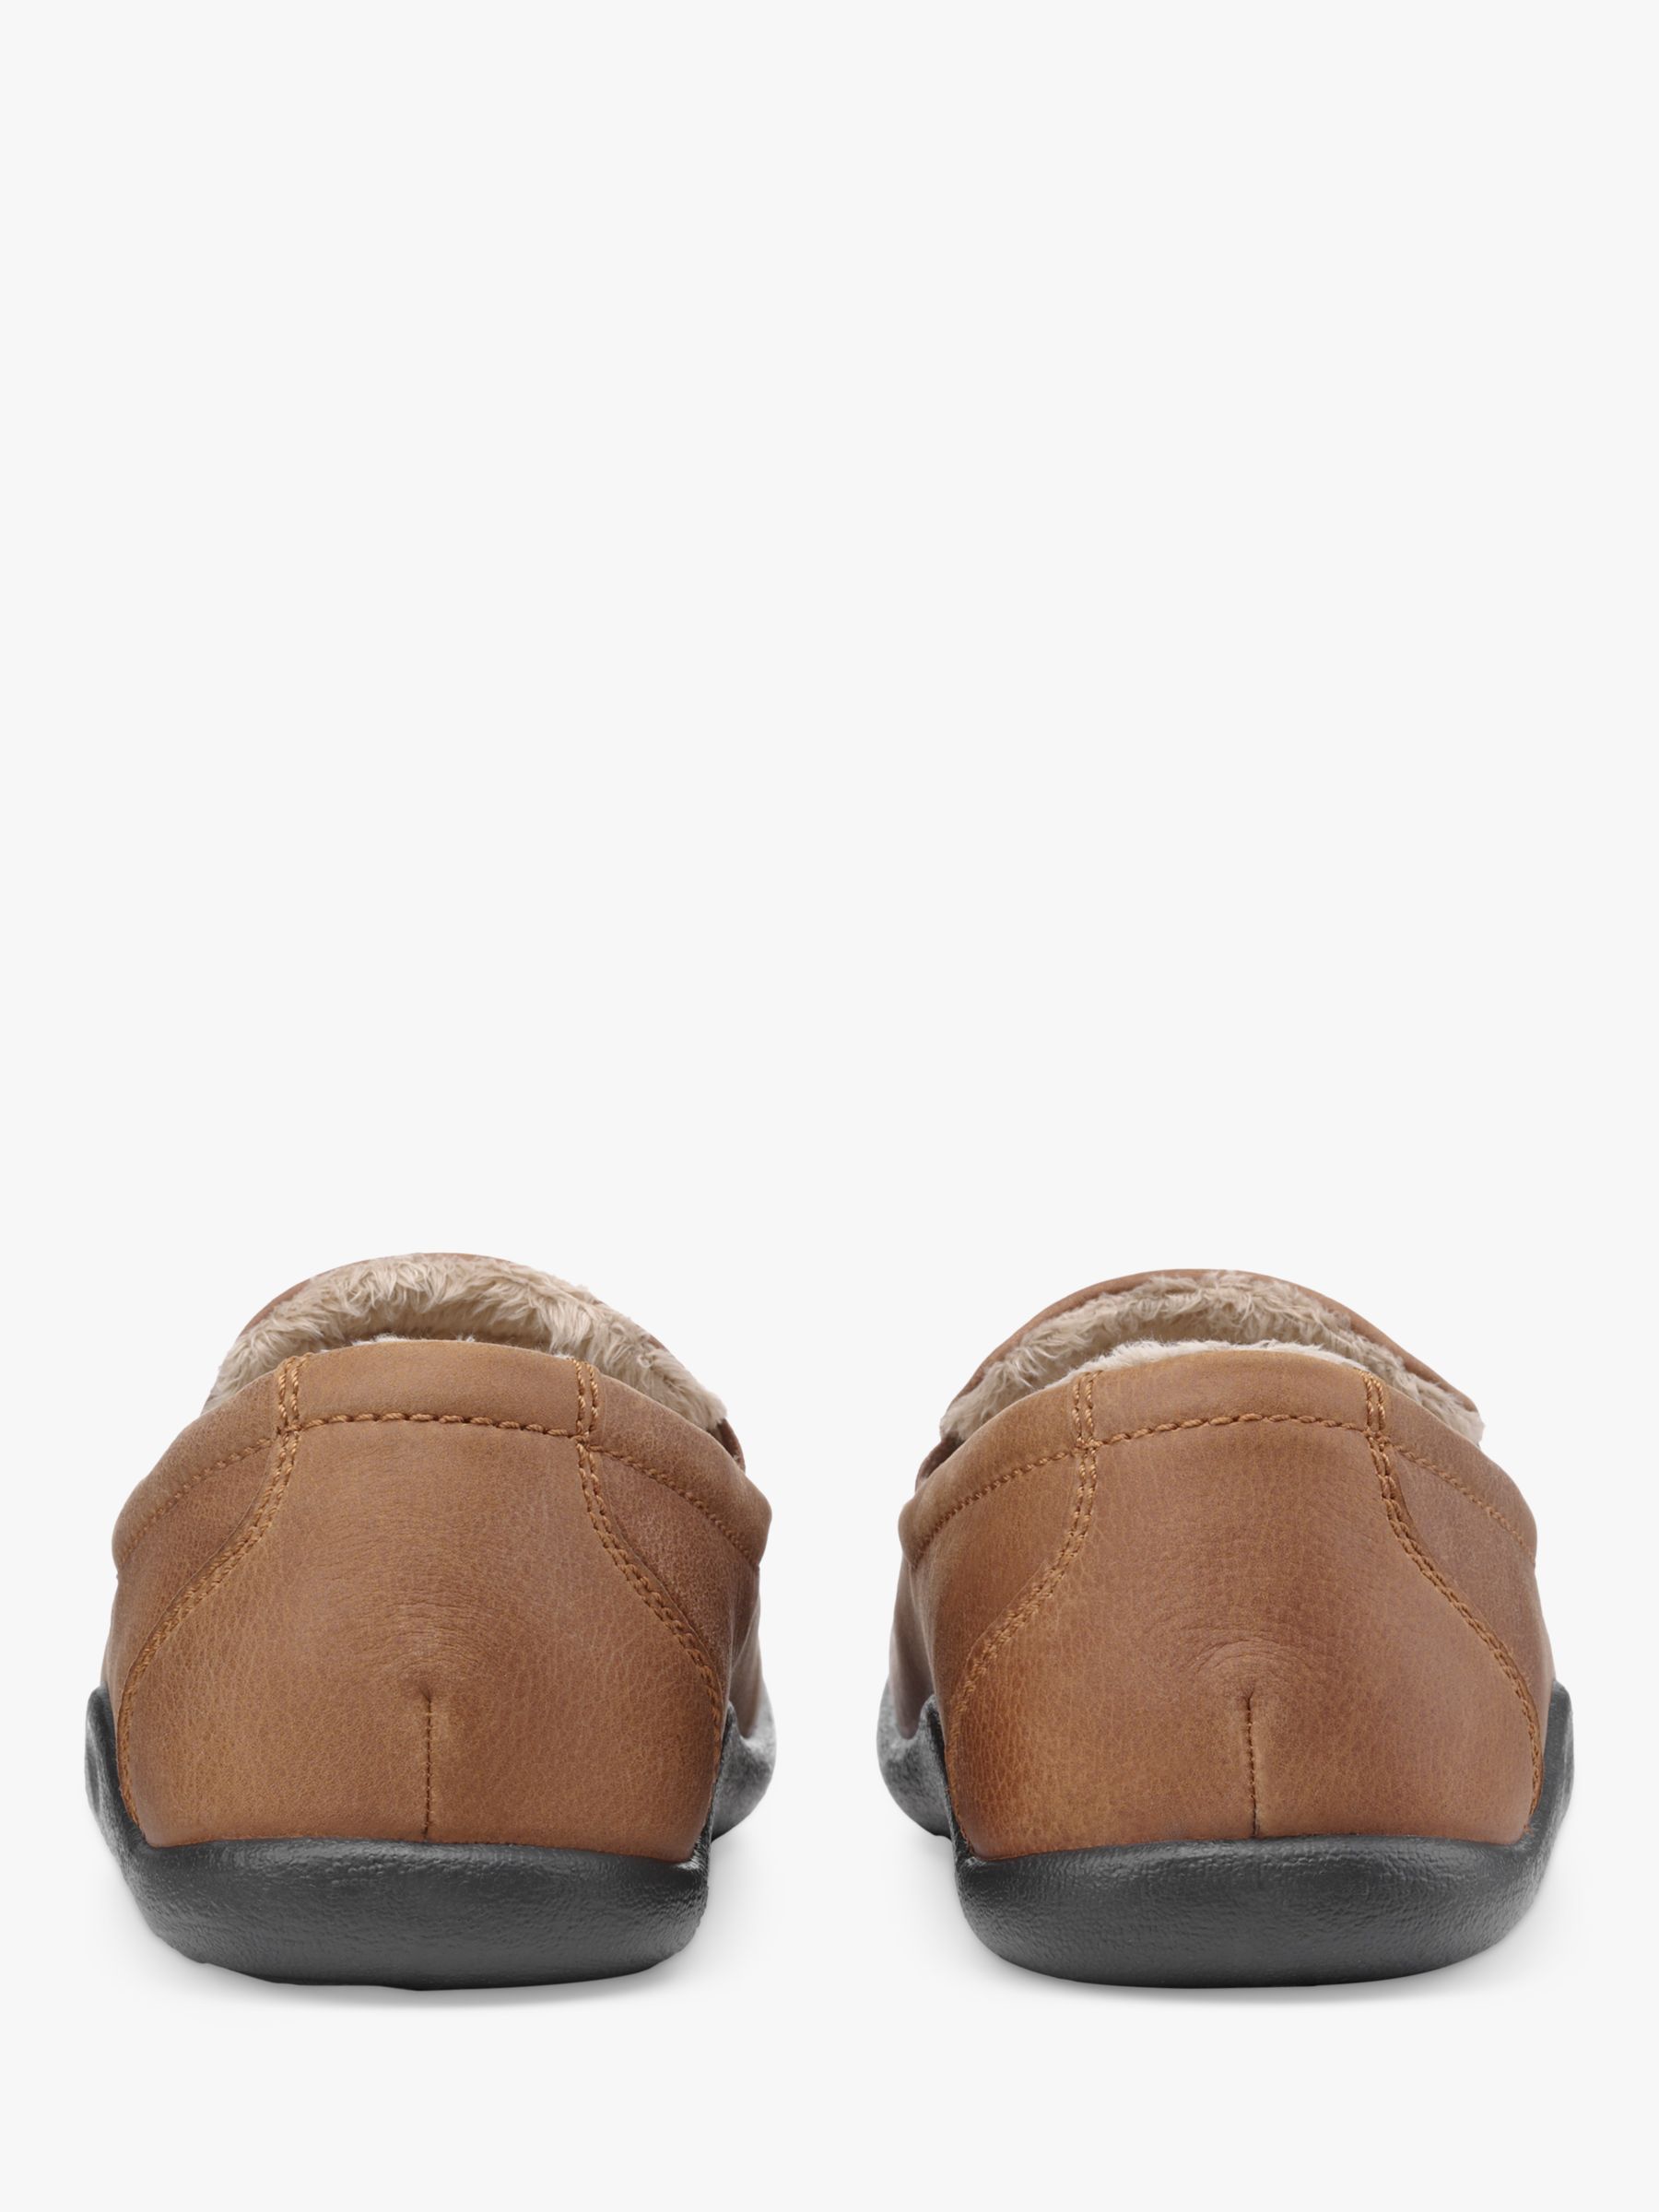 Buy Hotter Relax Leather Slippers Online at johnlewis.com